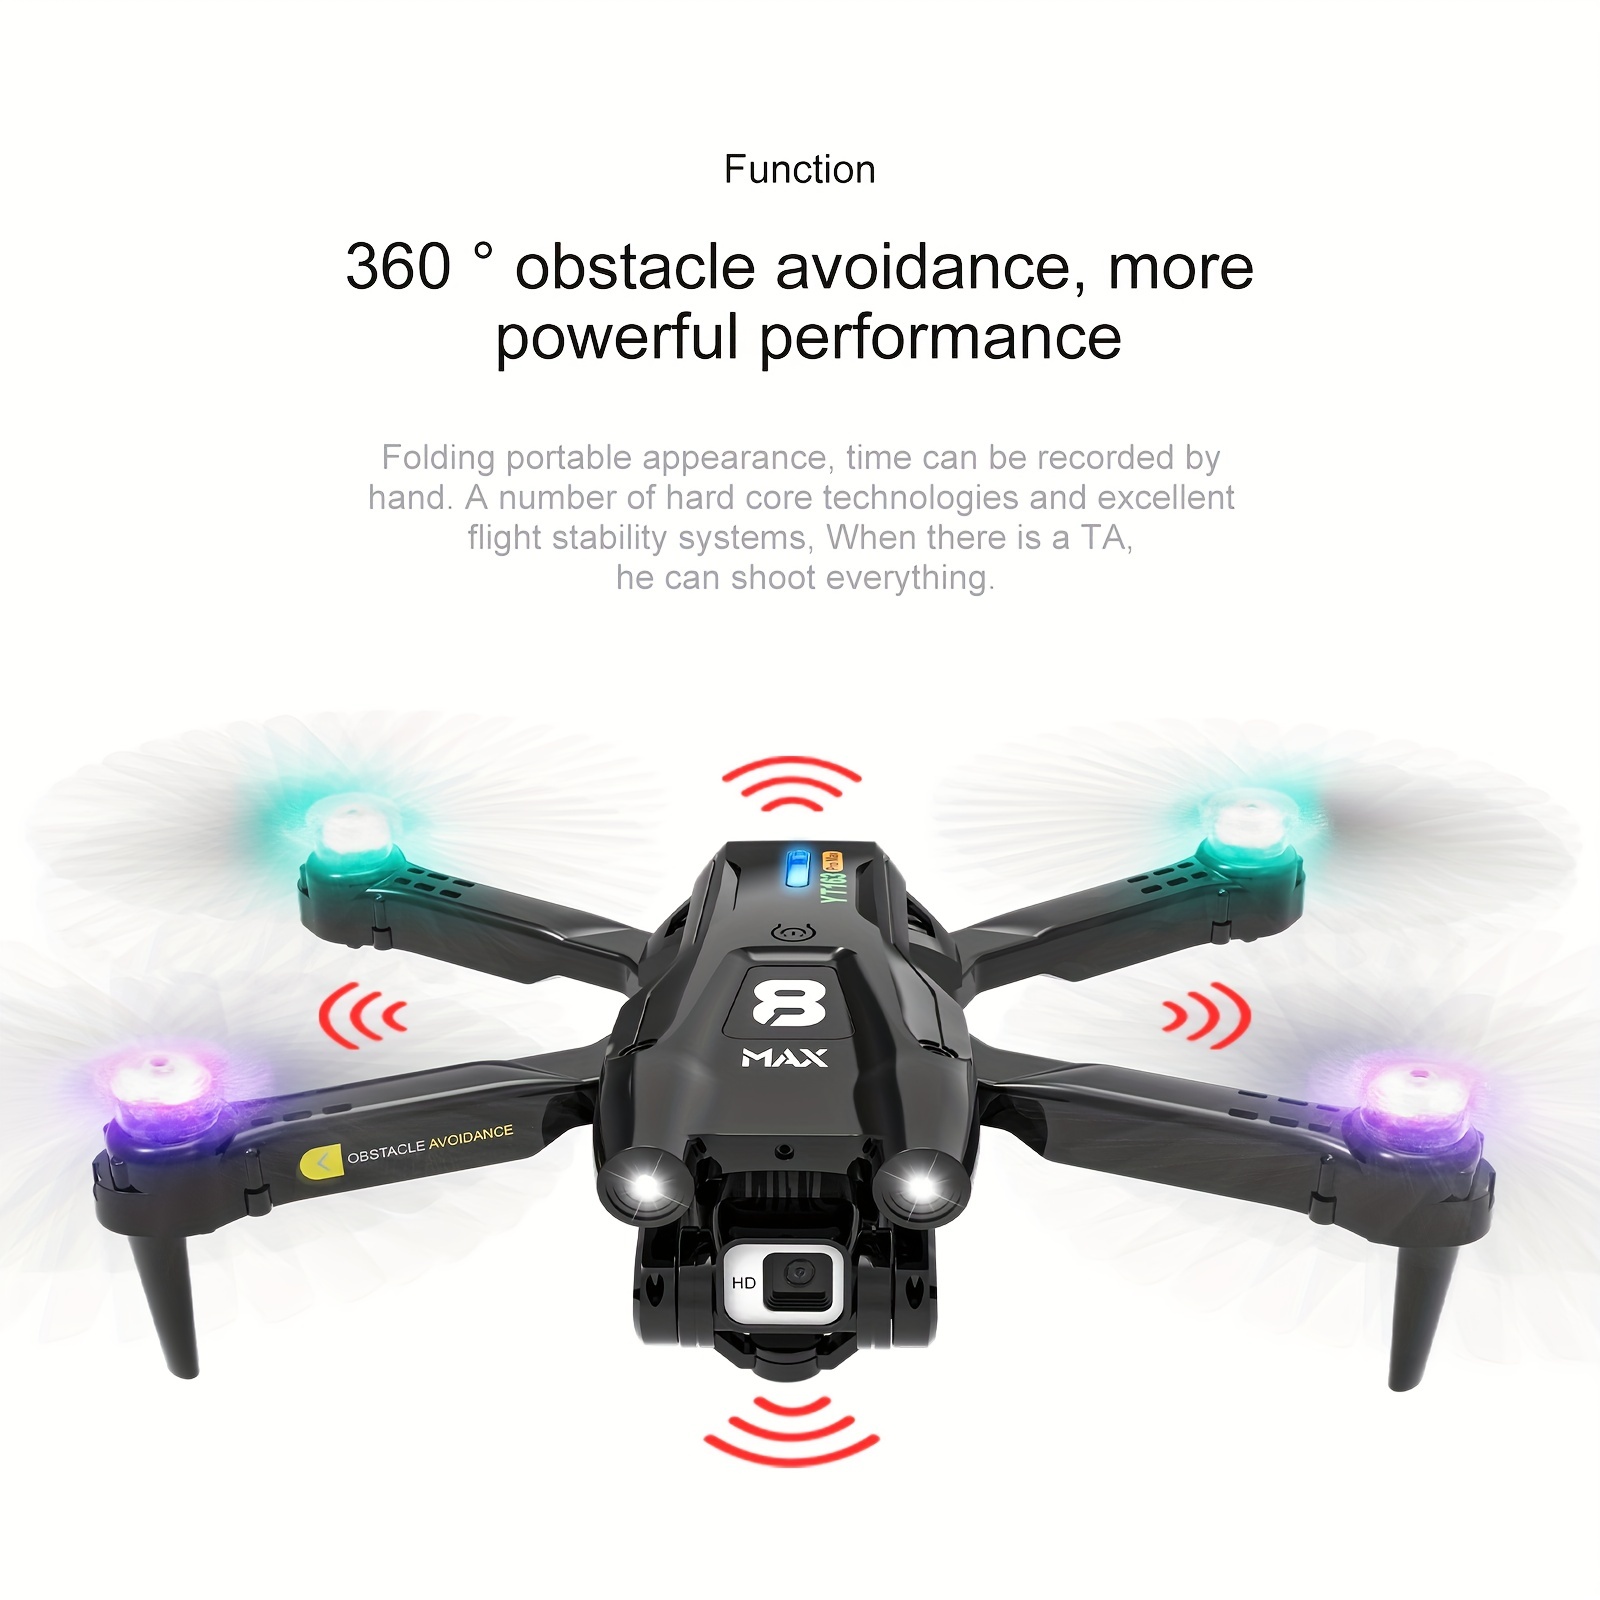 yt163 foldable drone remote control and app control easy to carry four sided sensor obstacle avoidance stable flight one key return high definition camera camera angle adjustable drone details 3